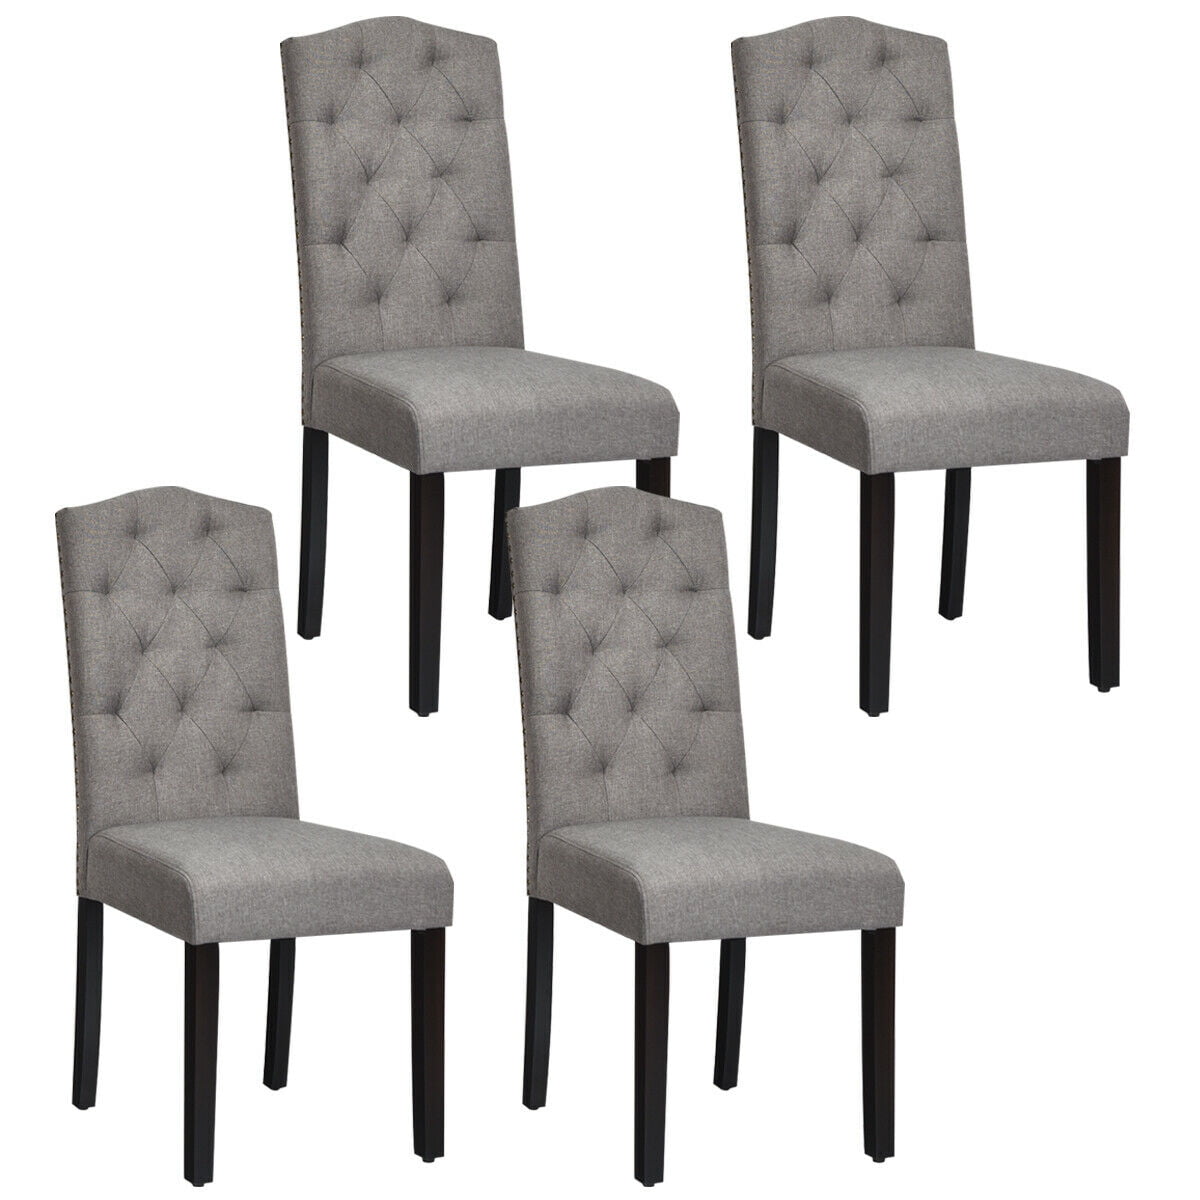 Dining Chairs Gymax Dining Chair, Set of 4, Grey - Walmart.com